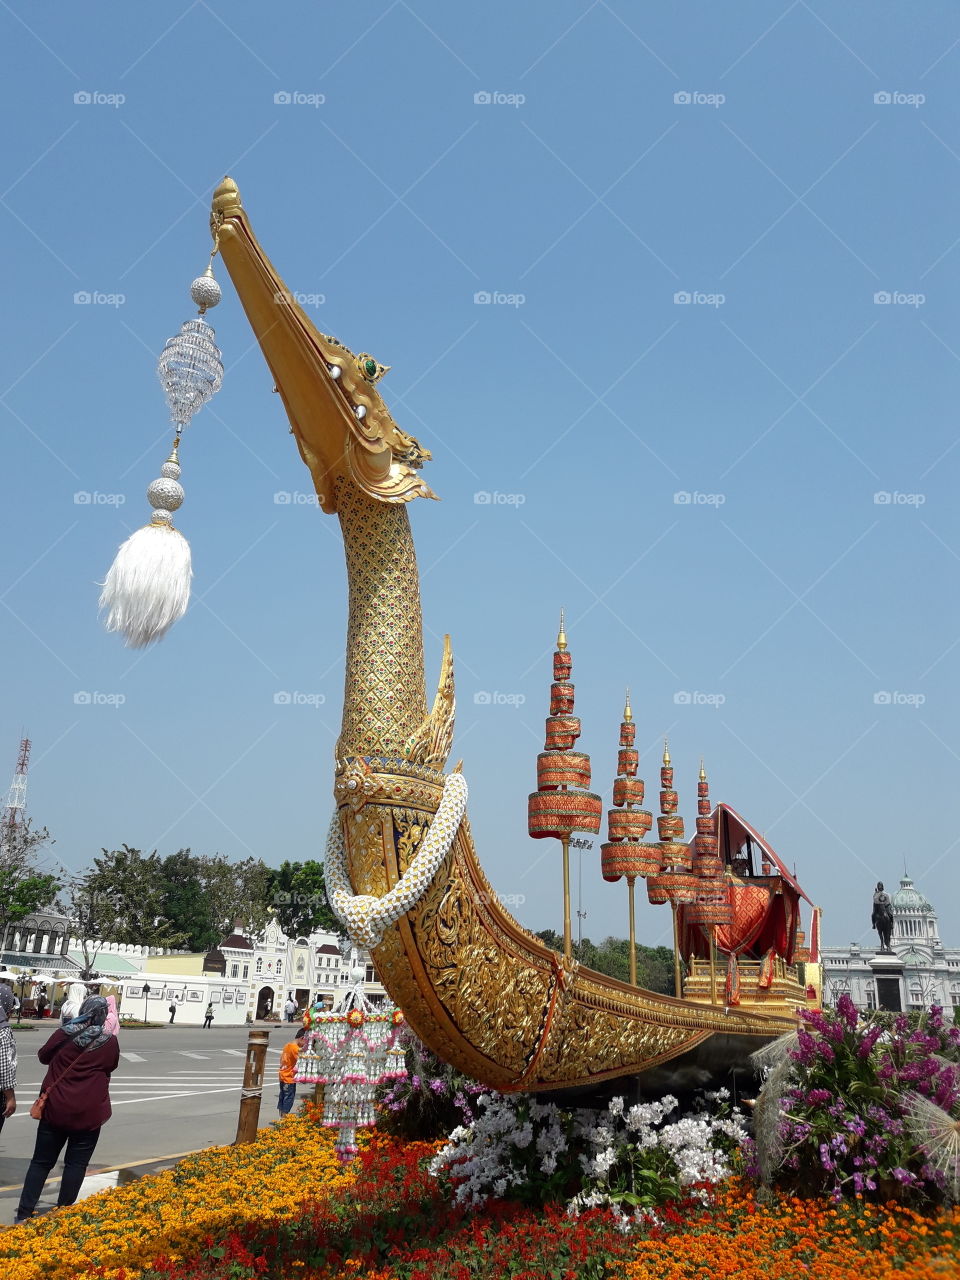 "Royal Barge Suphannahong Model"  simulated from real "Suphannahong Barge" which the length of the barge is 46.15 meters and the width at the beam 3.17 meters.The depth of the hull is 94 centimeters.